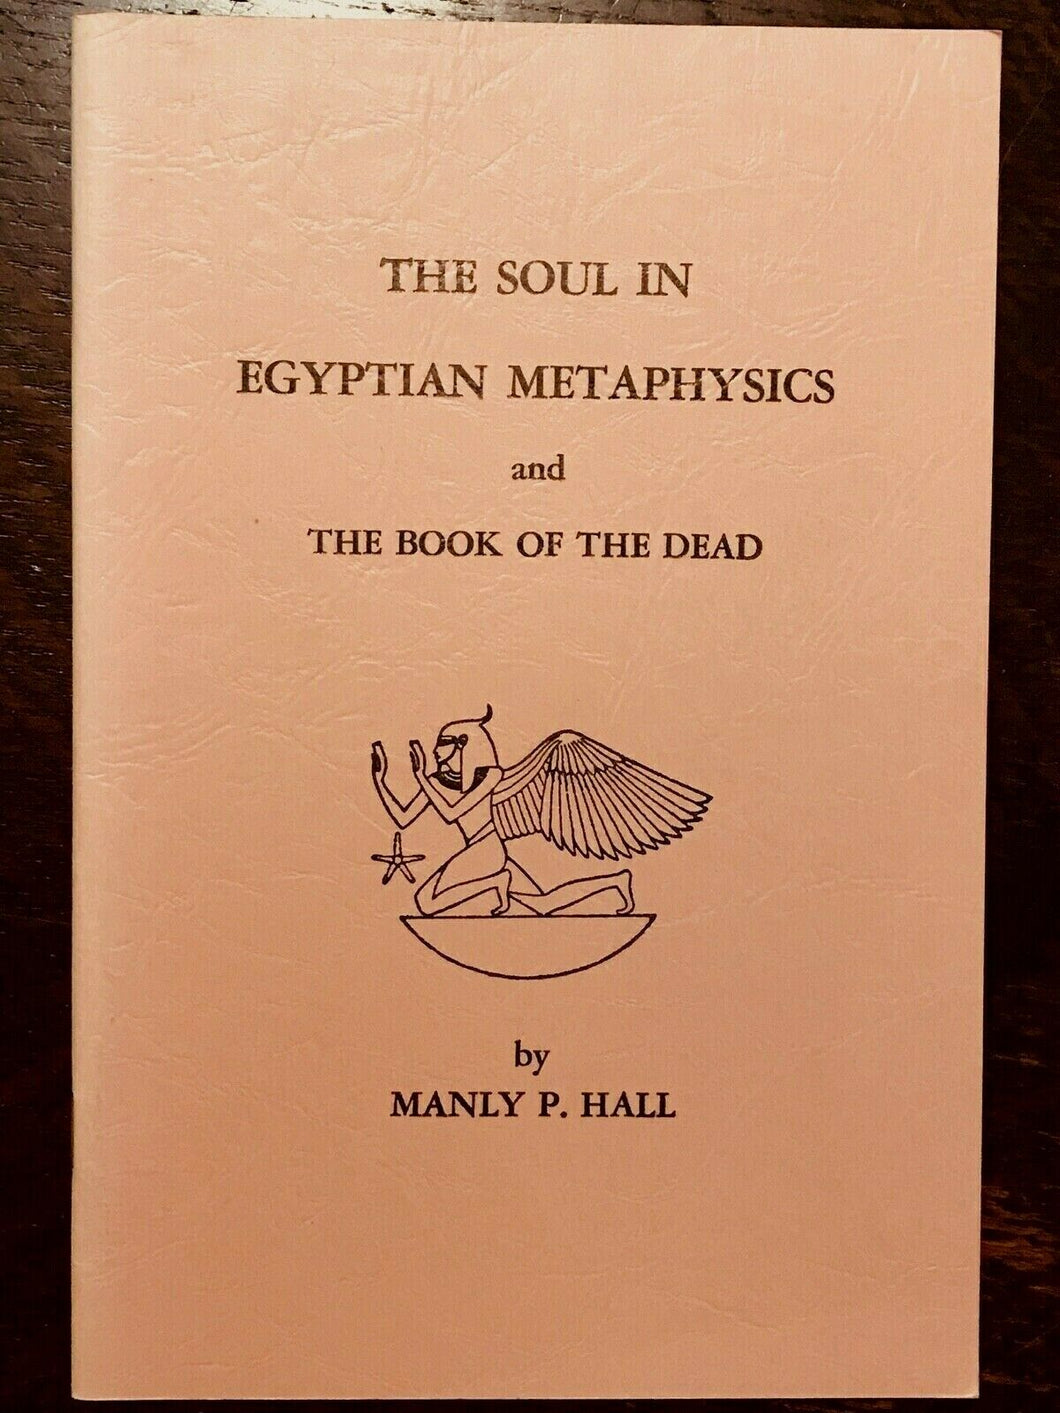 THE SOUL IN EGYPTIAN METAPHYSICS - Manly P. Hall - 1st Ed, 1965 BOOK OF THE DEAD